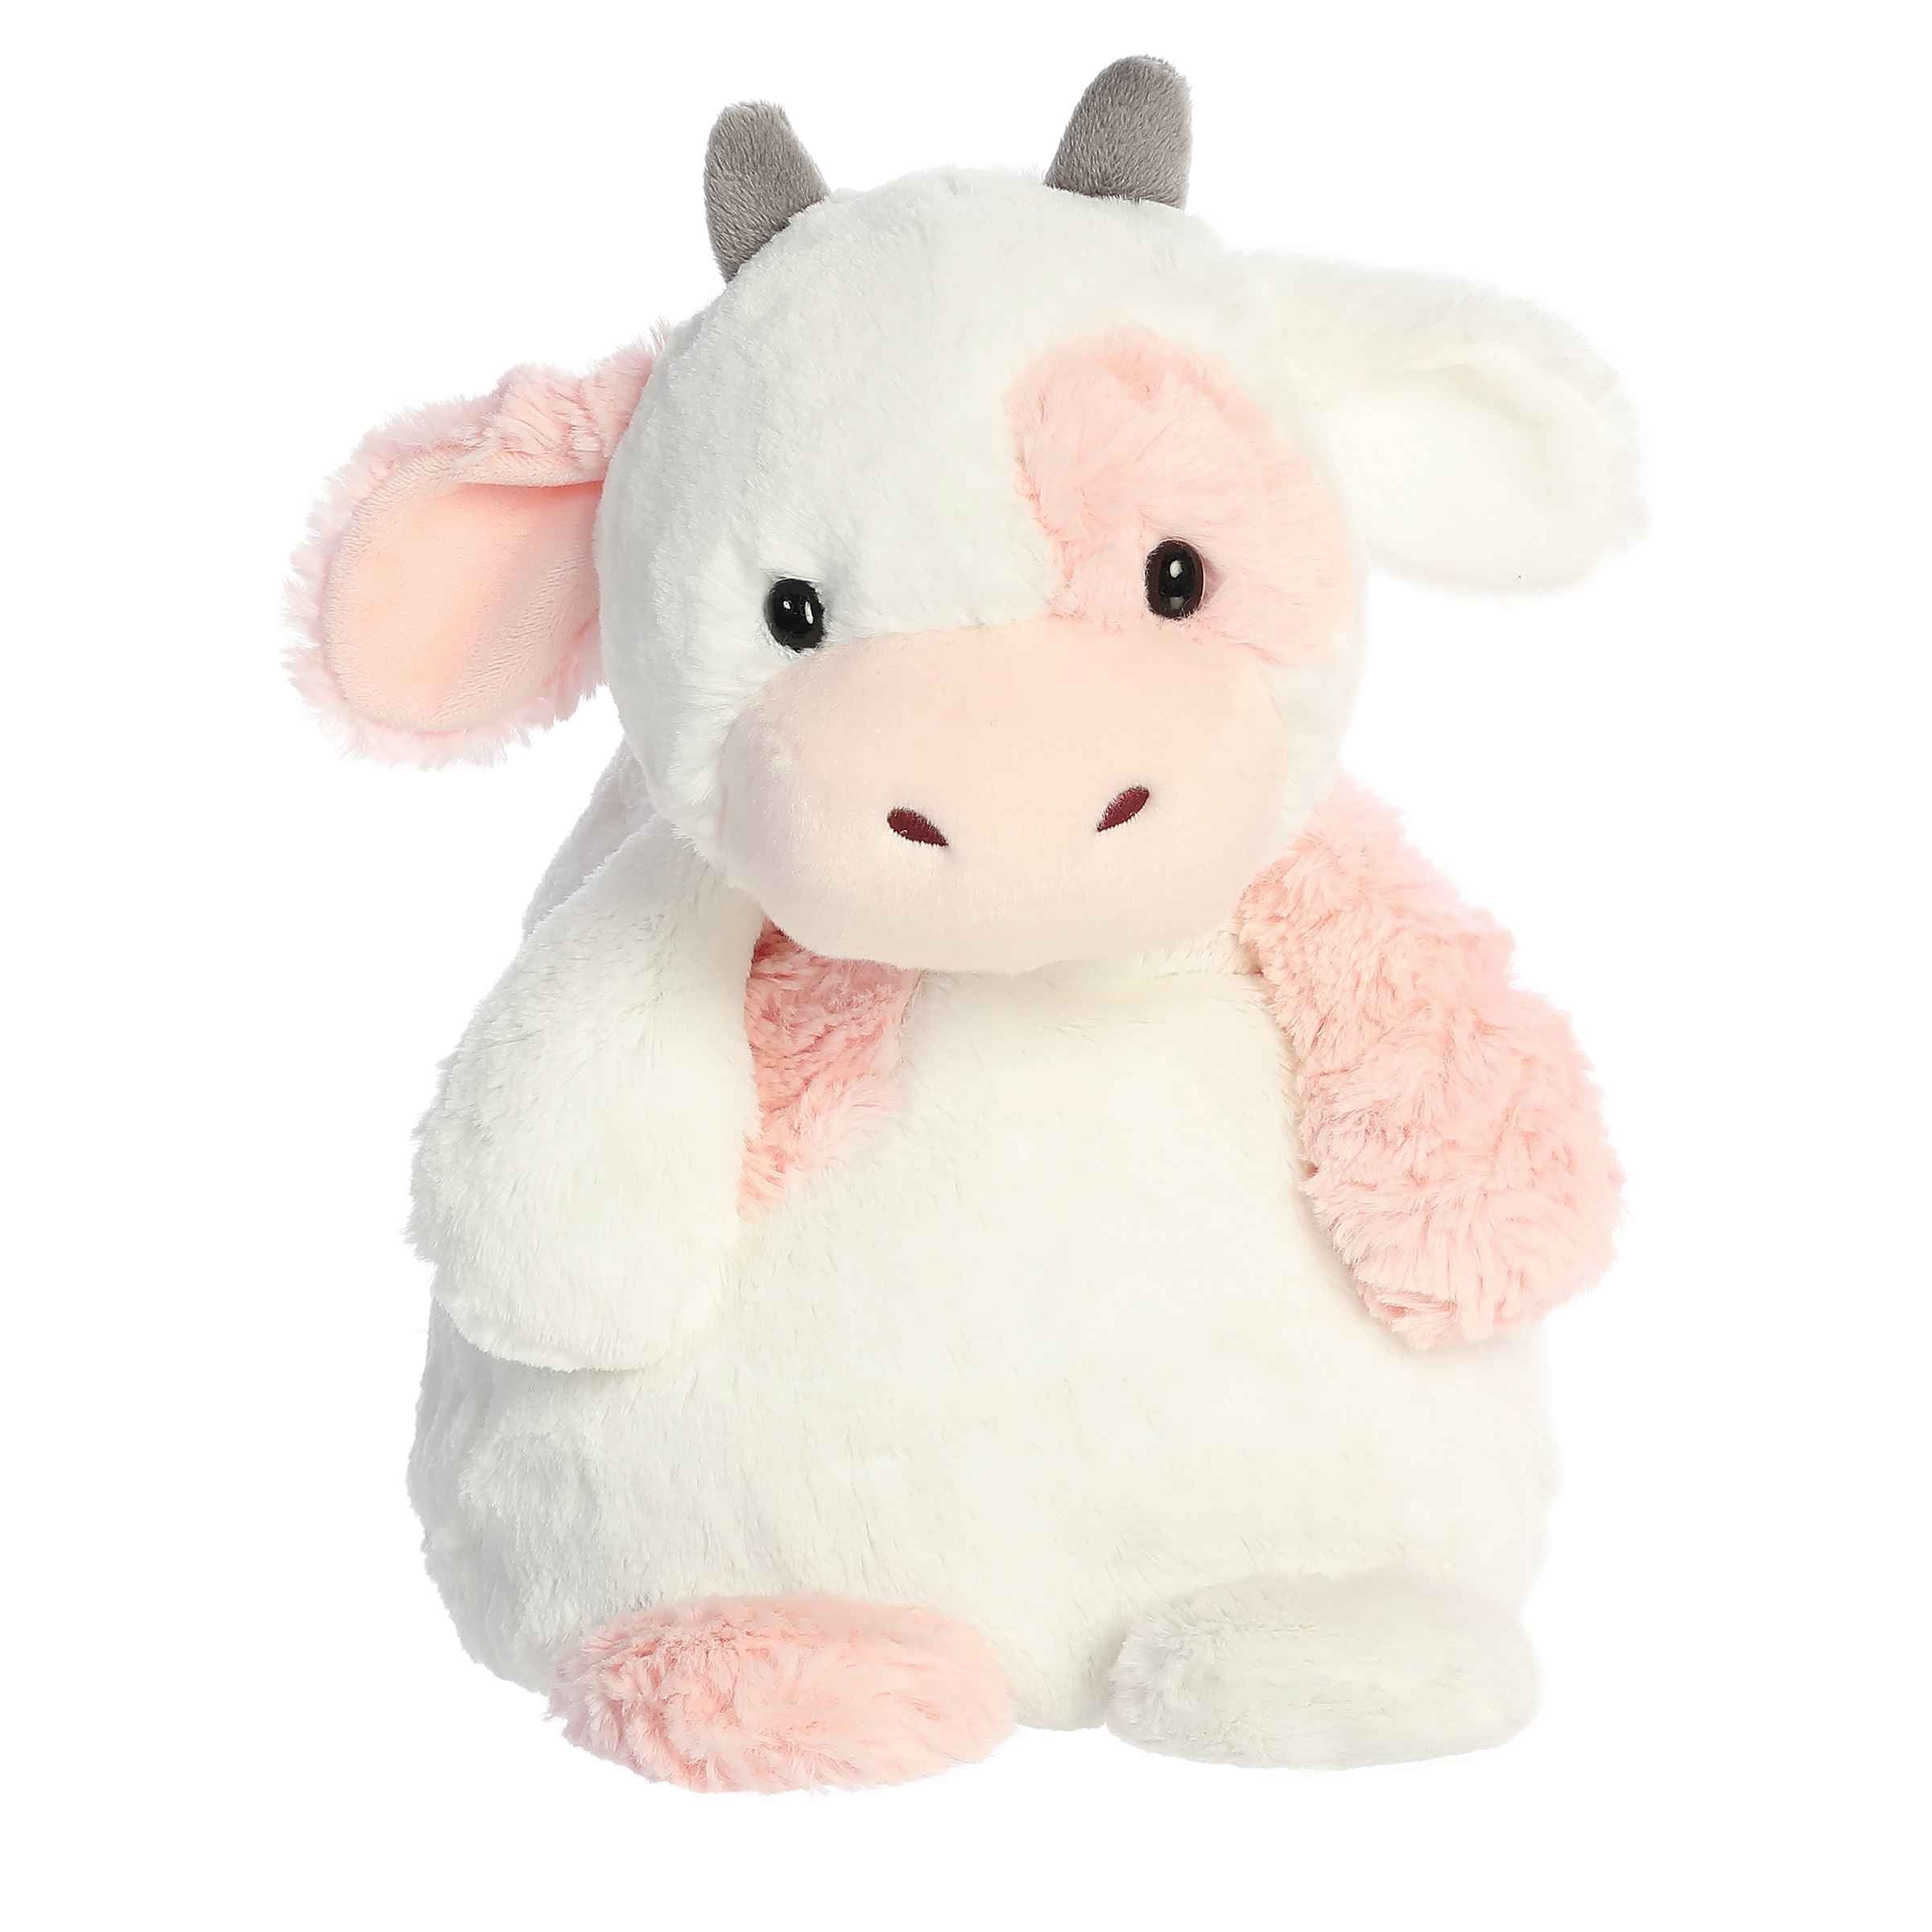 Serene Strawberry Cow plush, pink and white fur, seated with inviting eyes and warm smile from Huggle Pals